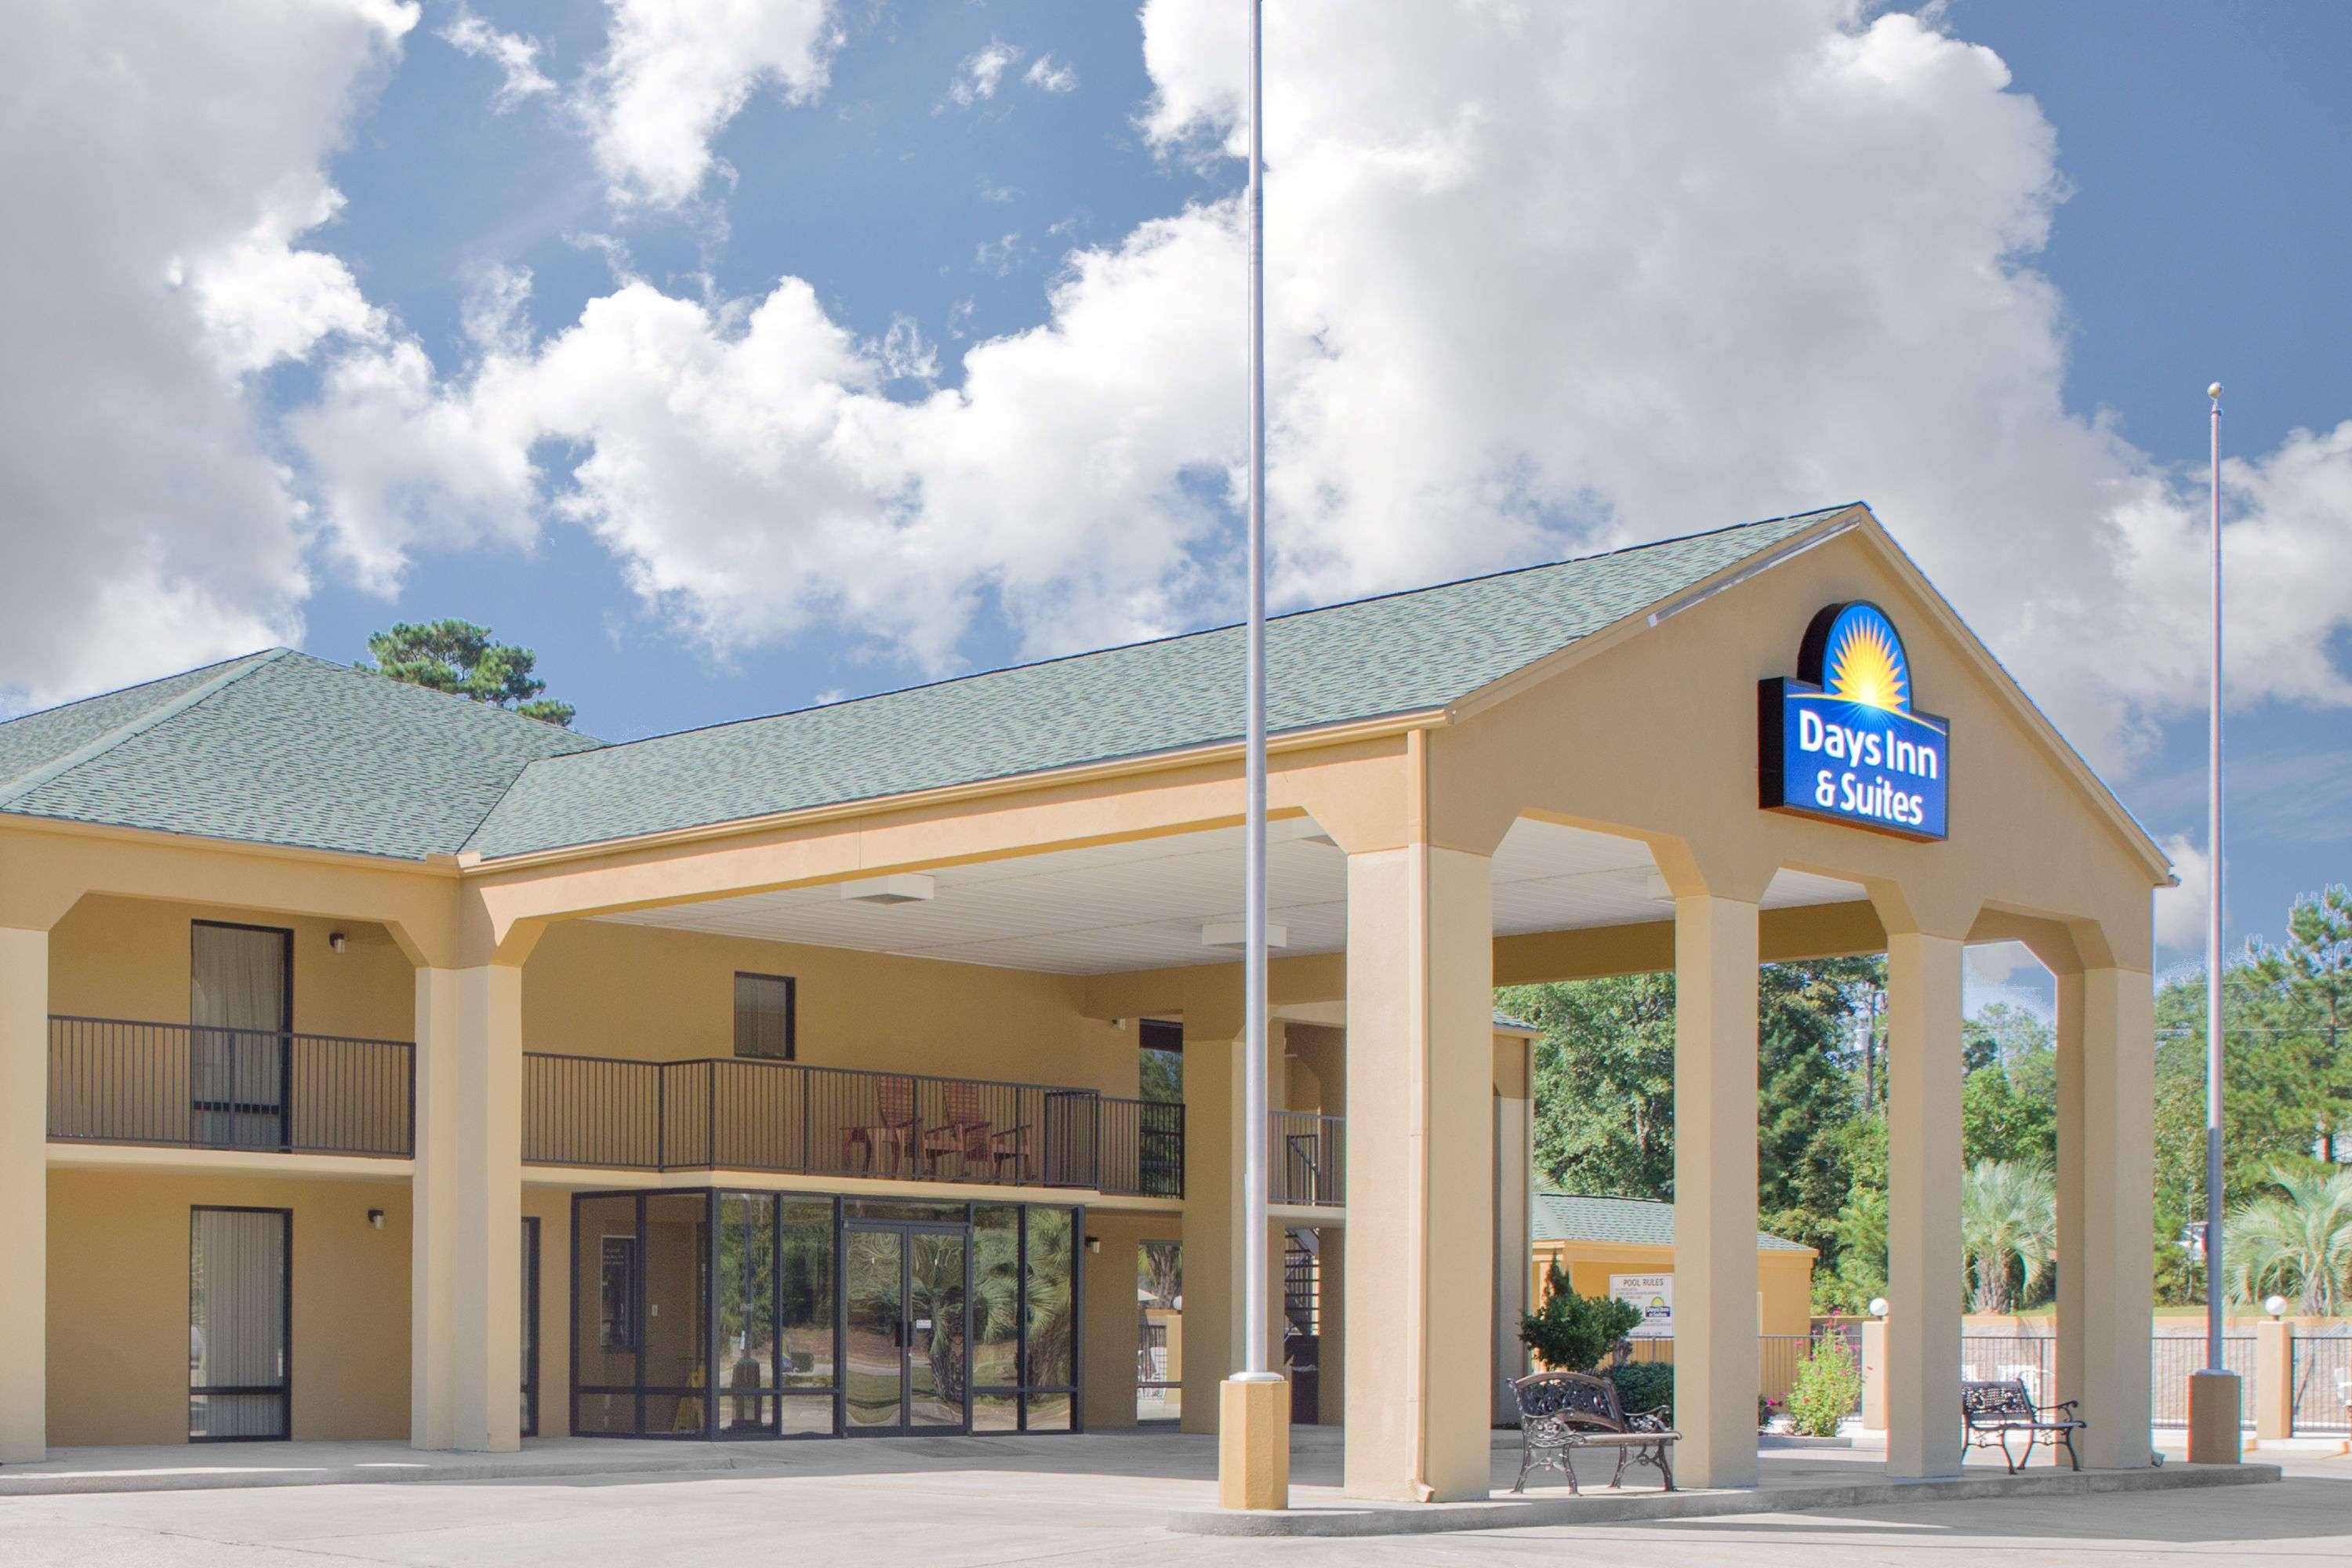 Days Inn Andalusia